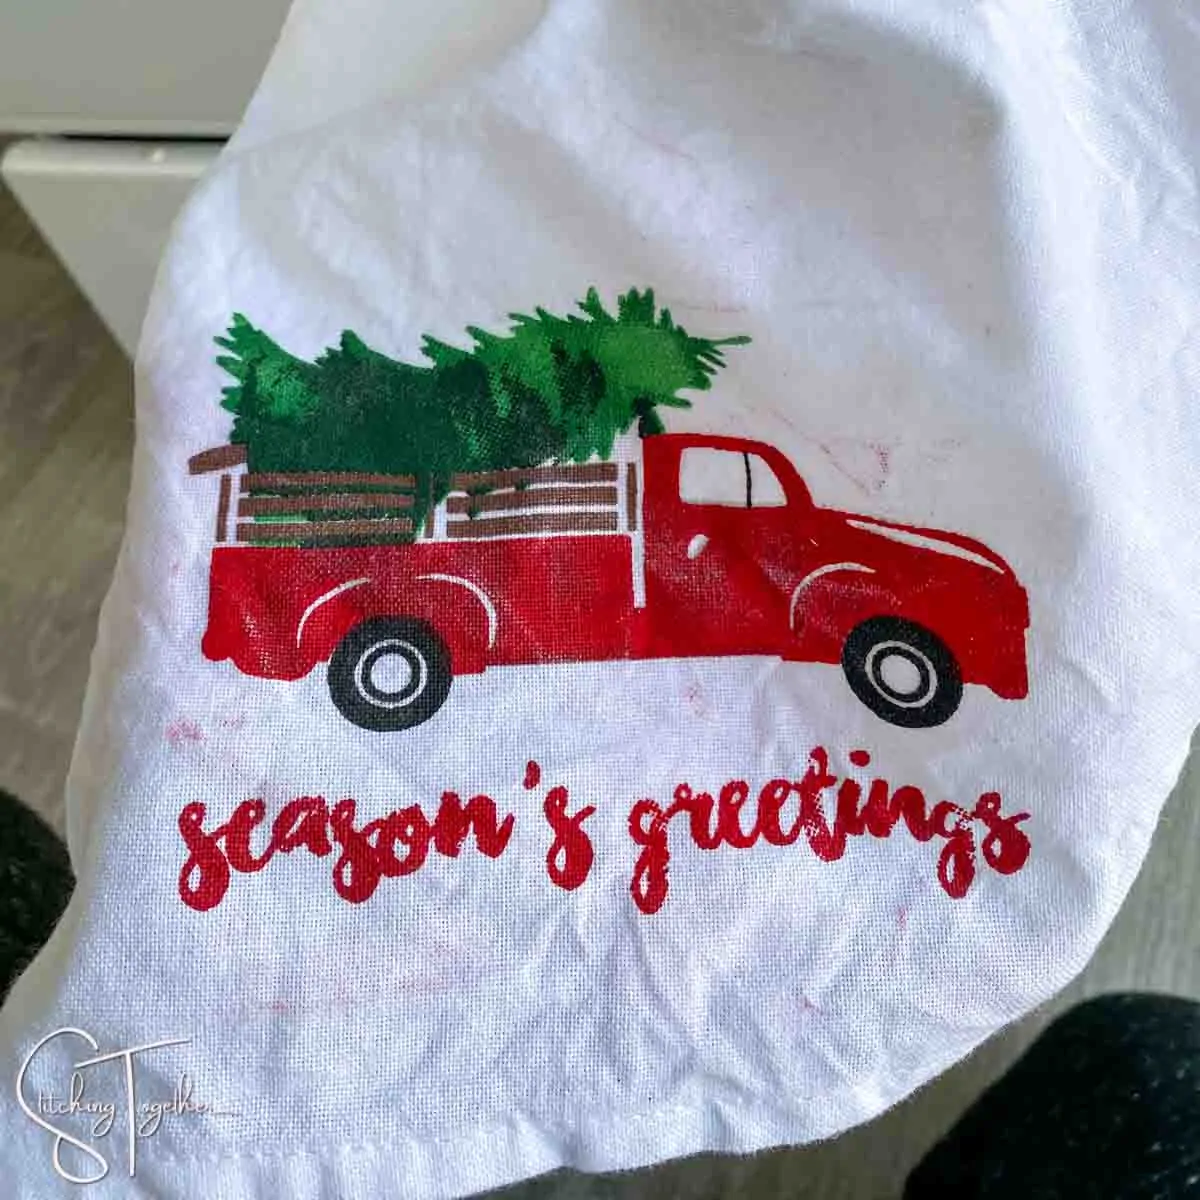 close up of bottom of dishtowel with red truck